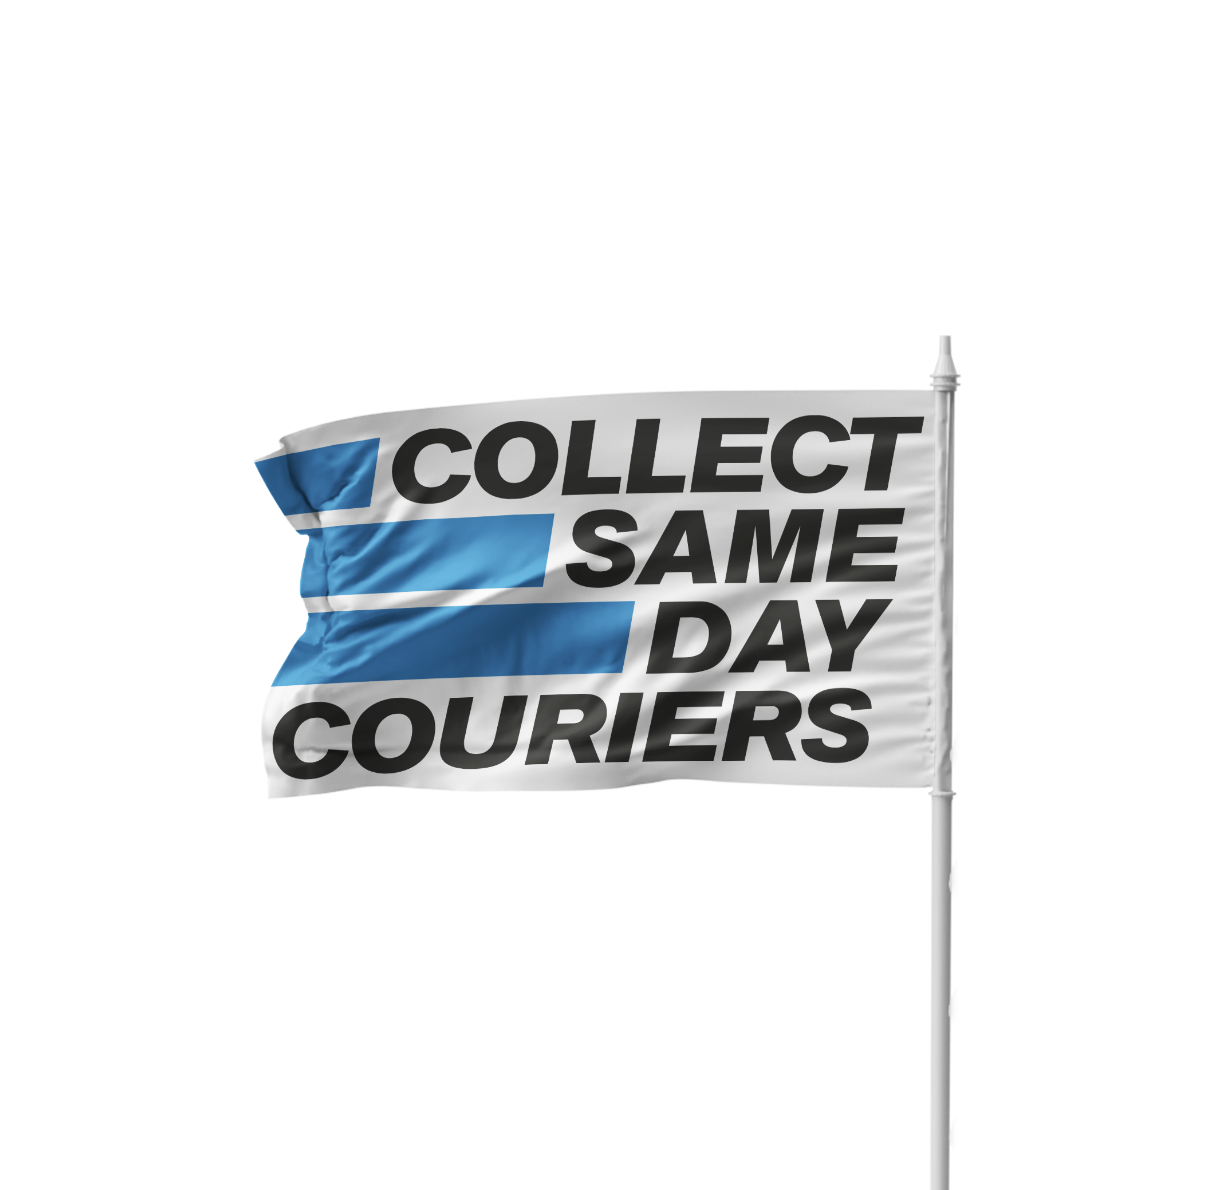 collect same day couriers flag